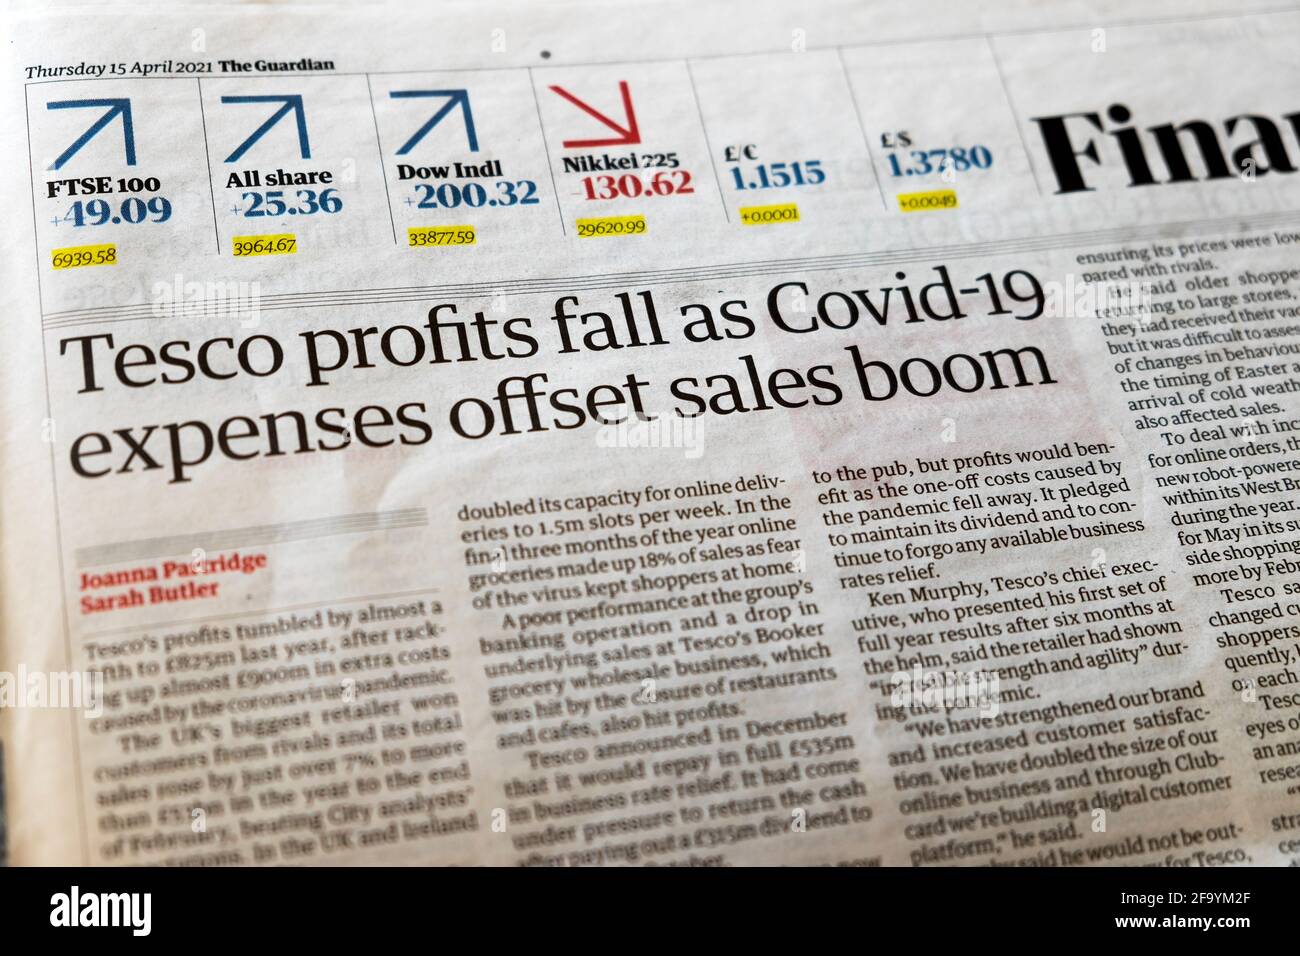 'Tesco profits fall as Covid-19 expenses offset sales boom' Financial Guardian  newspaper headline business page 15 April 2021 London England UK Stock Photo